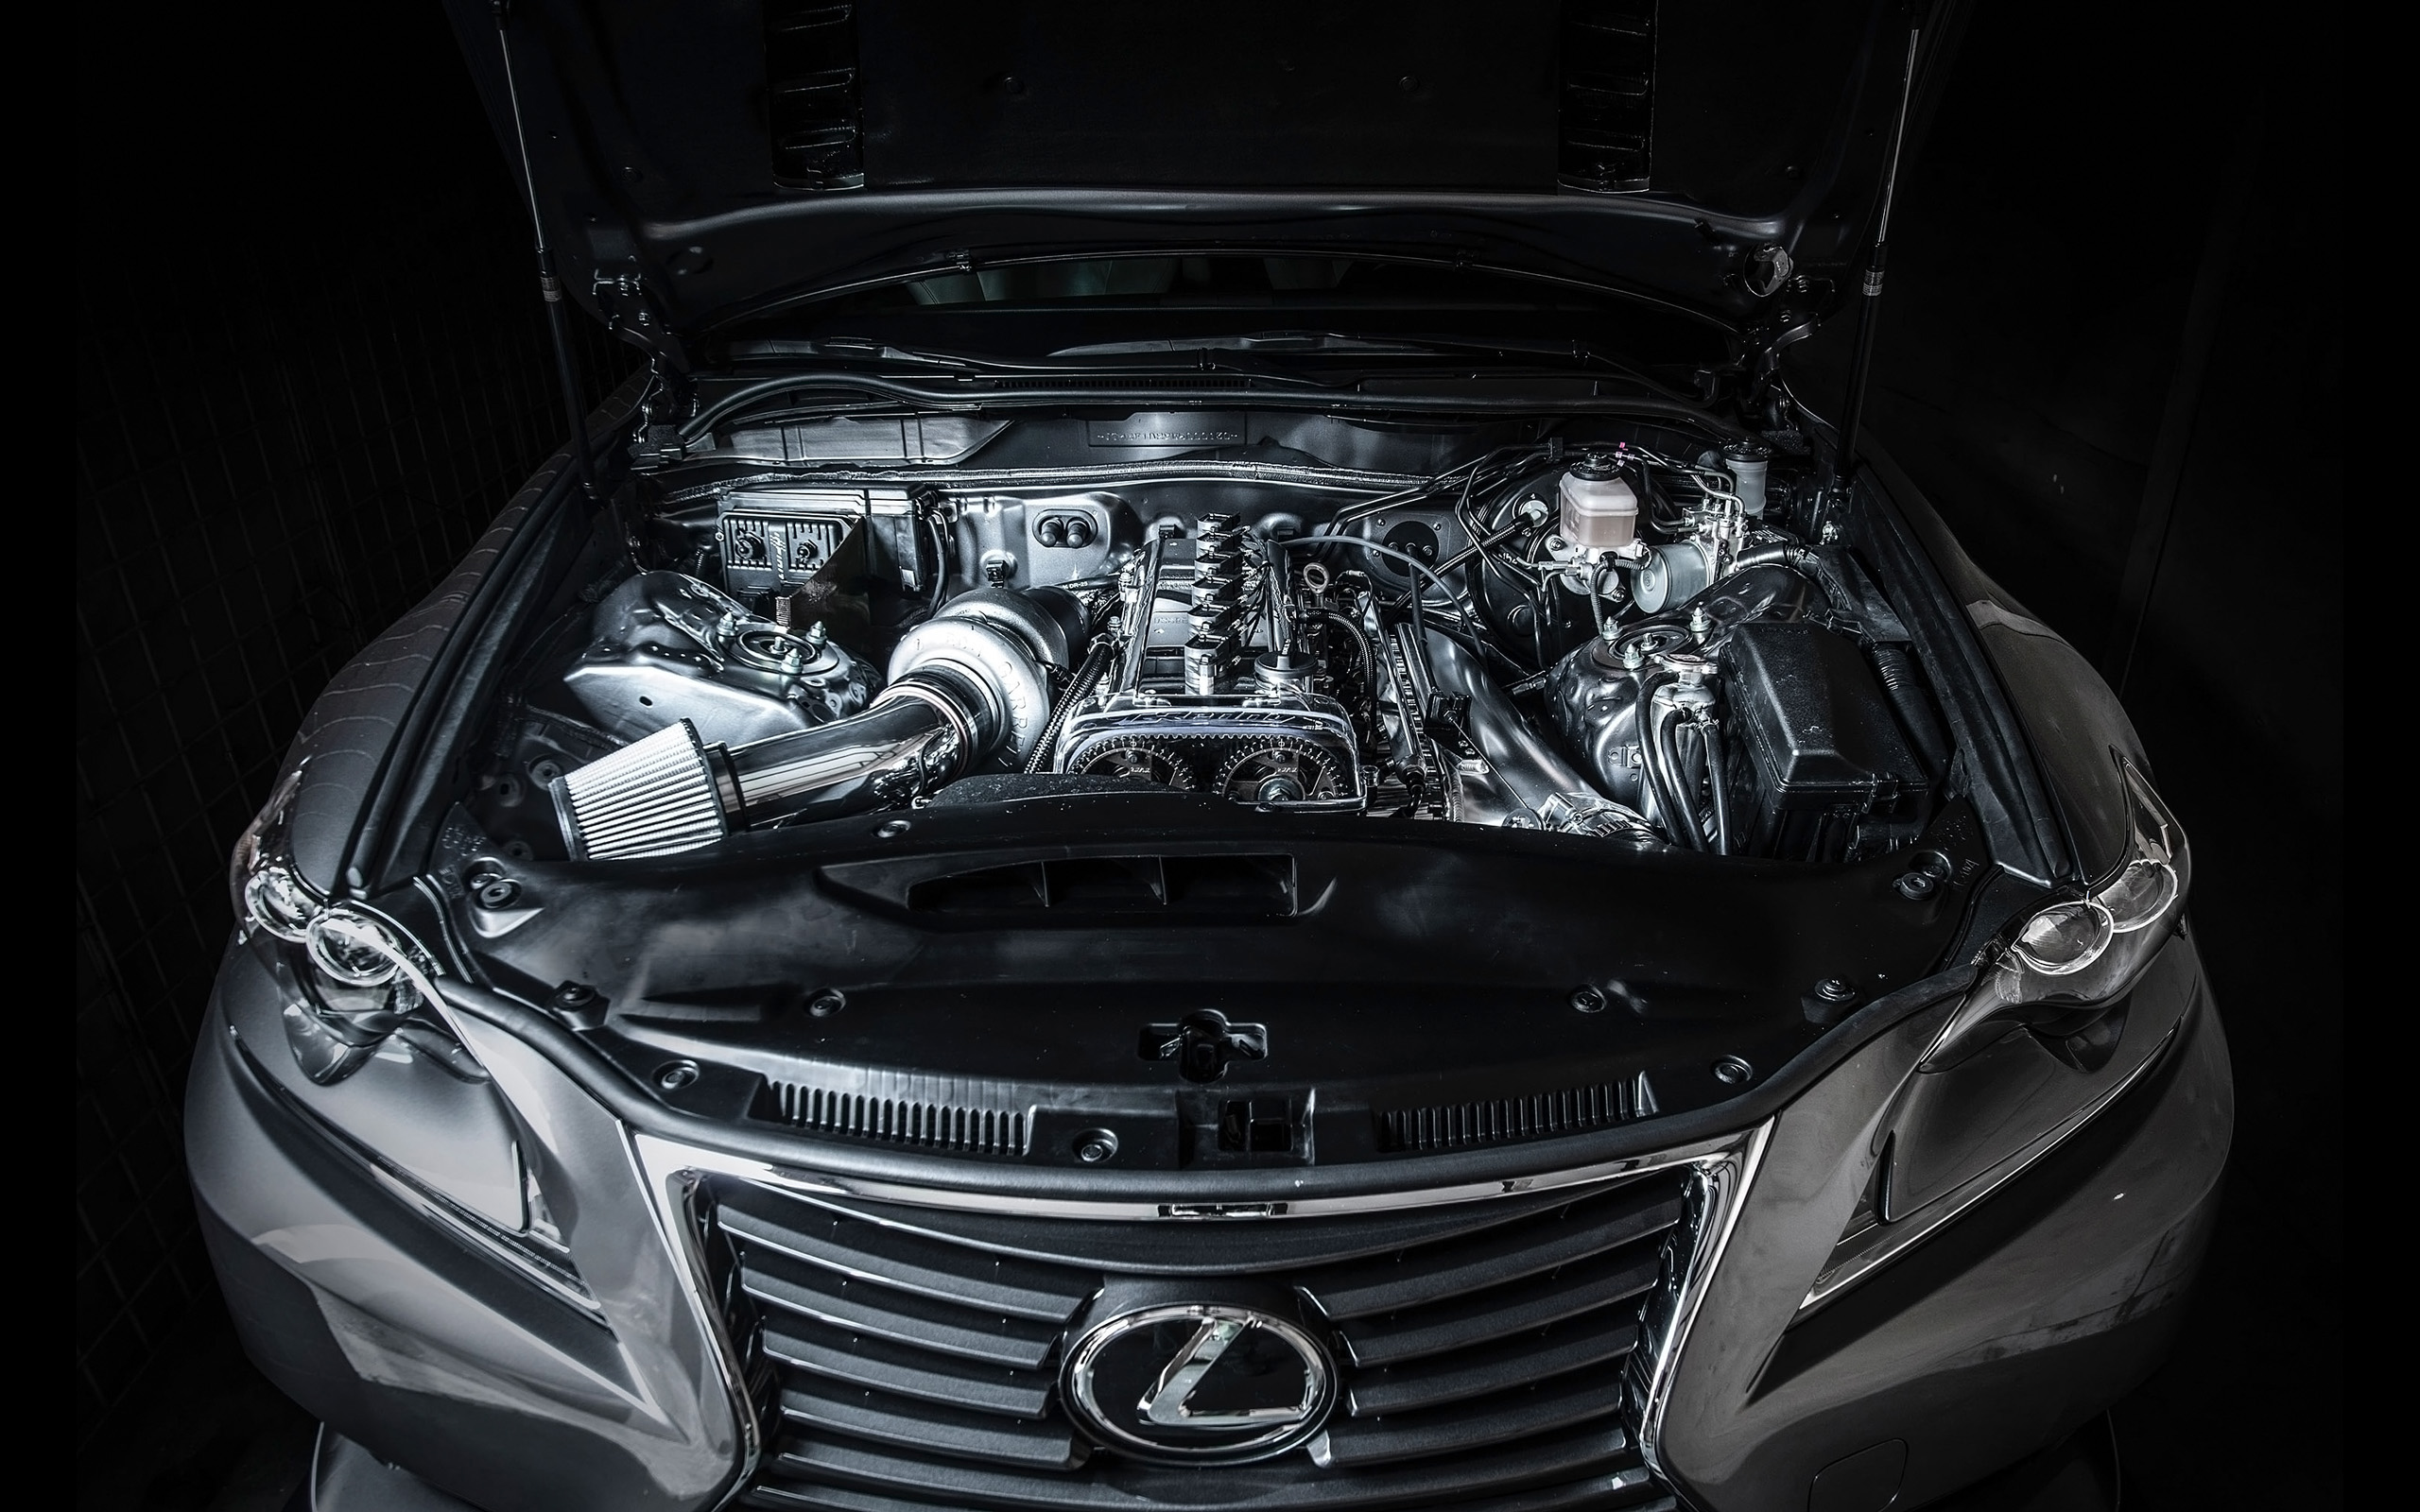 2014, Lexus, Is, 340, By, Philip, Chase, Tuning, I s, Engine Wallpaper